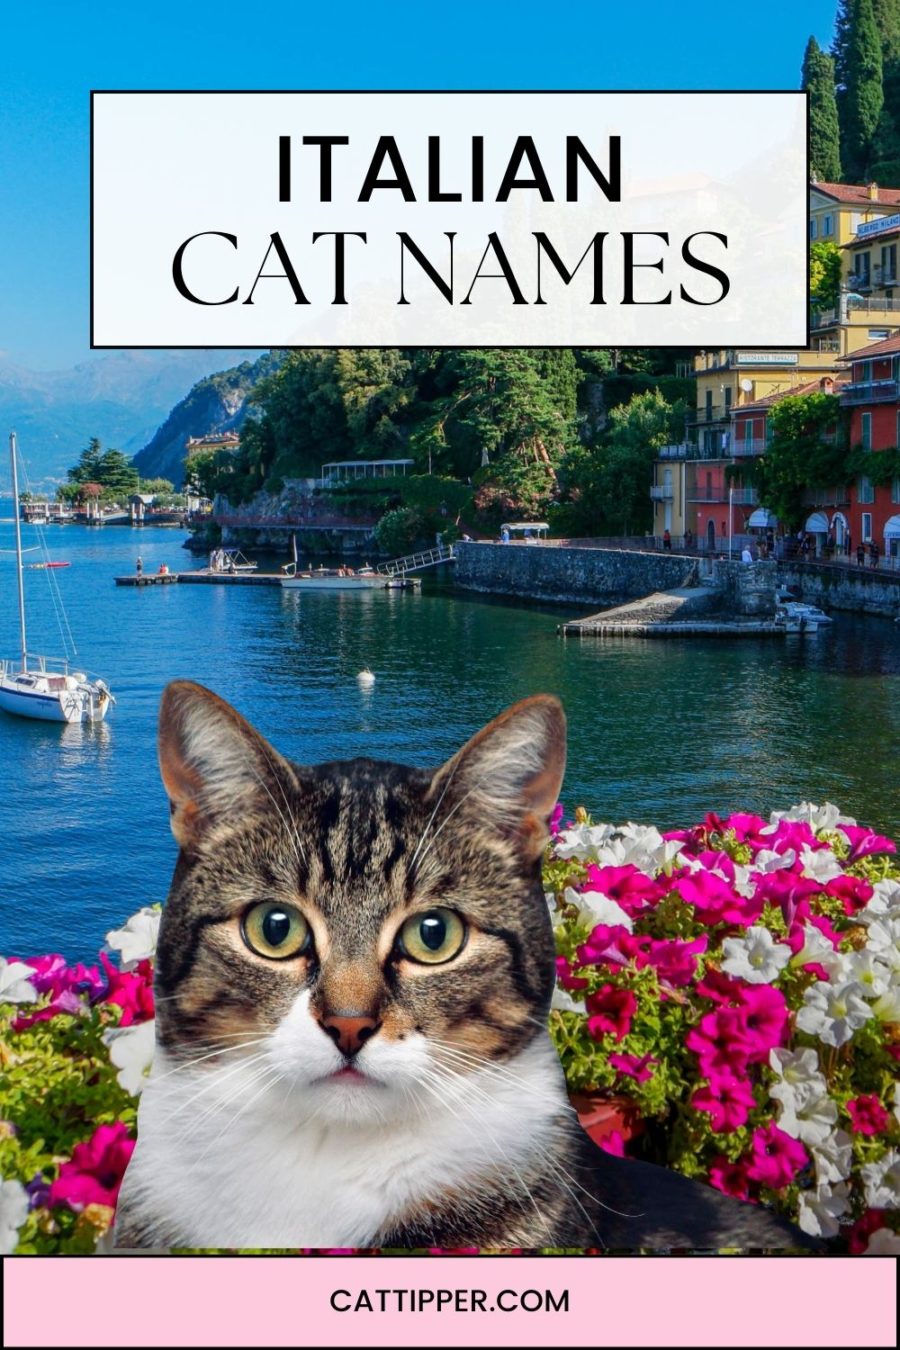 image of cat with background of Lake Como, Italy and wording Italian Cat Names